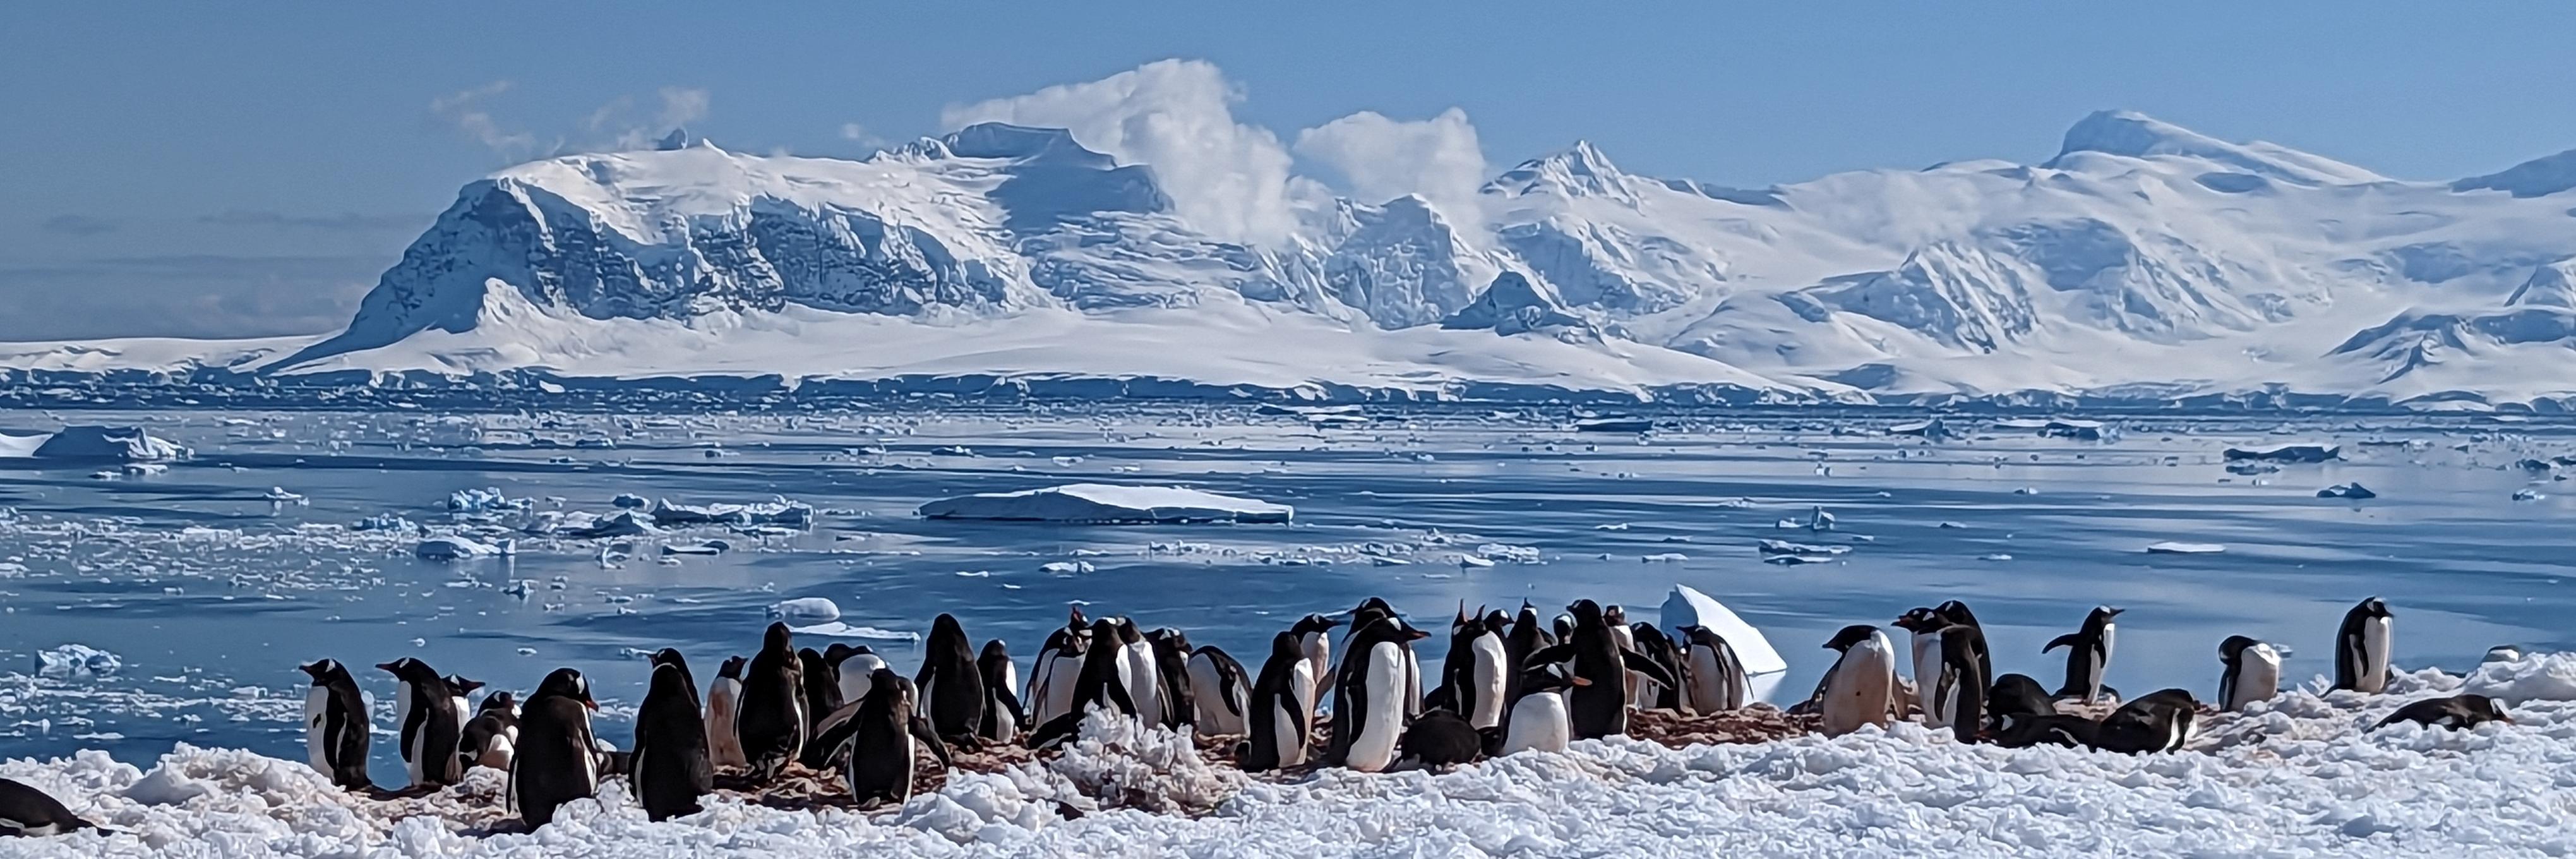 A waddle of penguins against the backdrop of glaciers